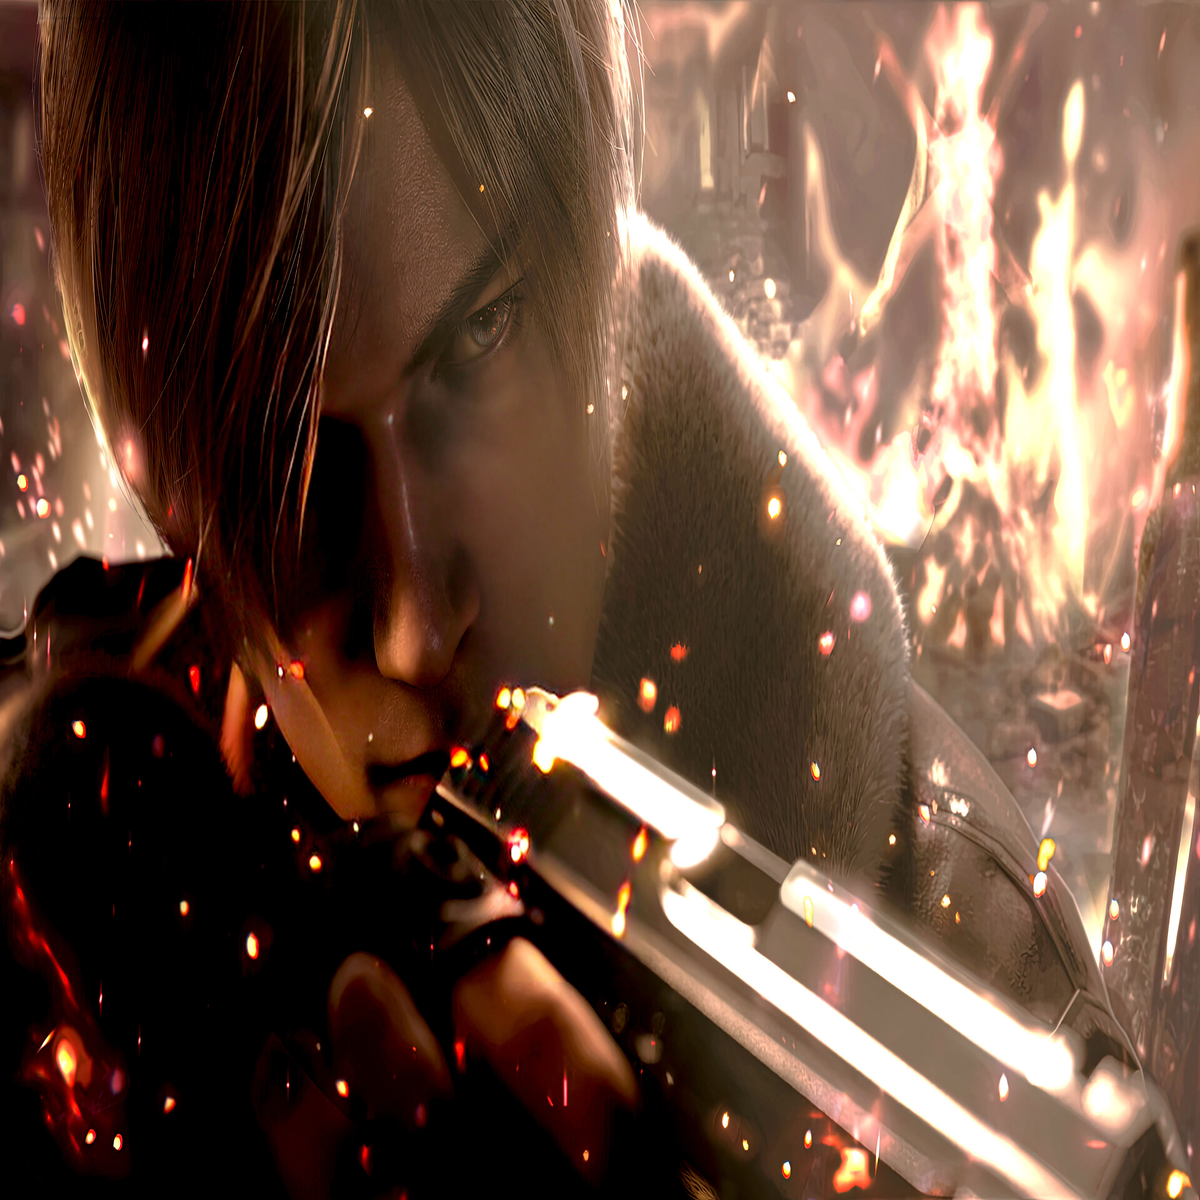 Resident Evil 4: Separate Ways DLC will heavily expand the use of